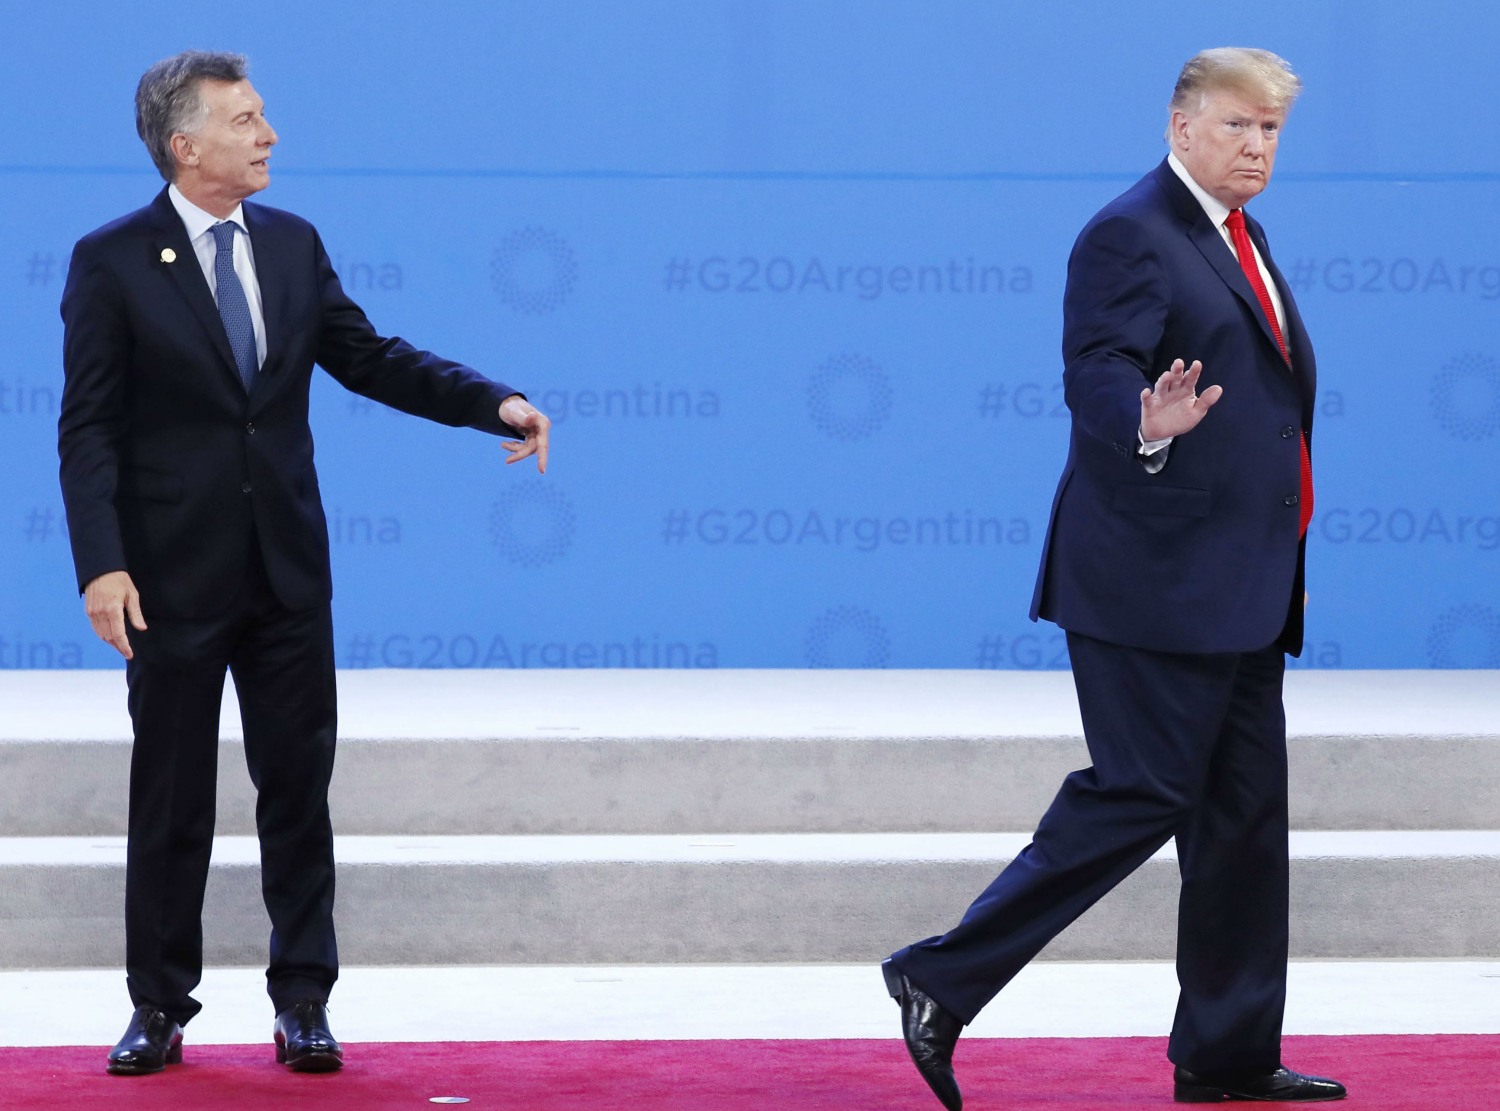 G-20 summit in Buenos Aires